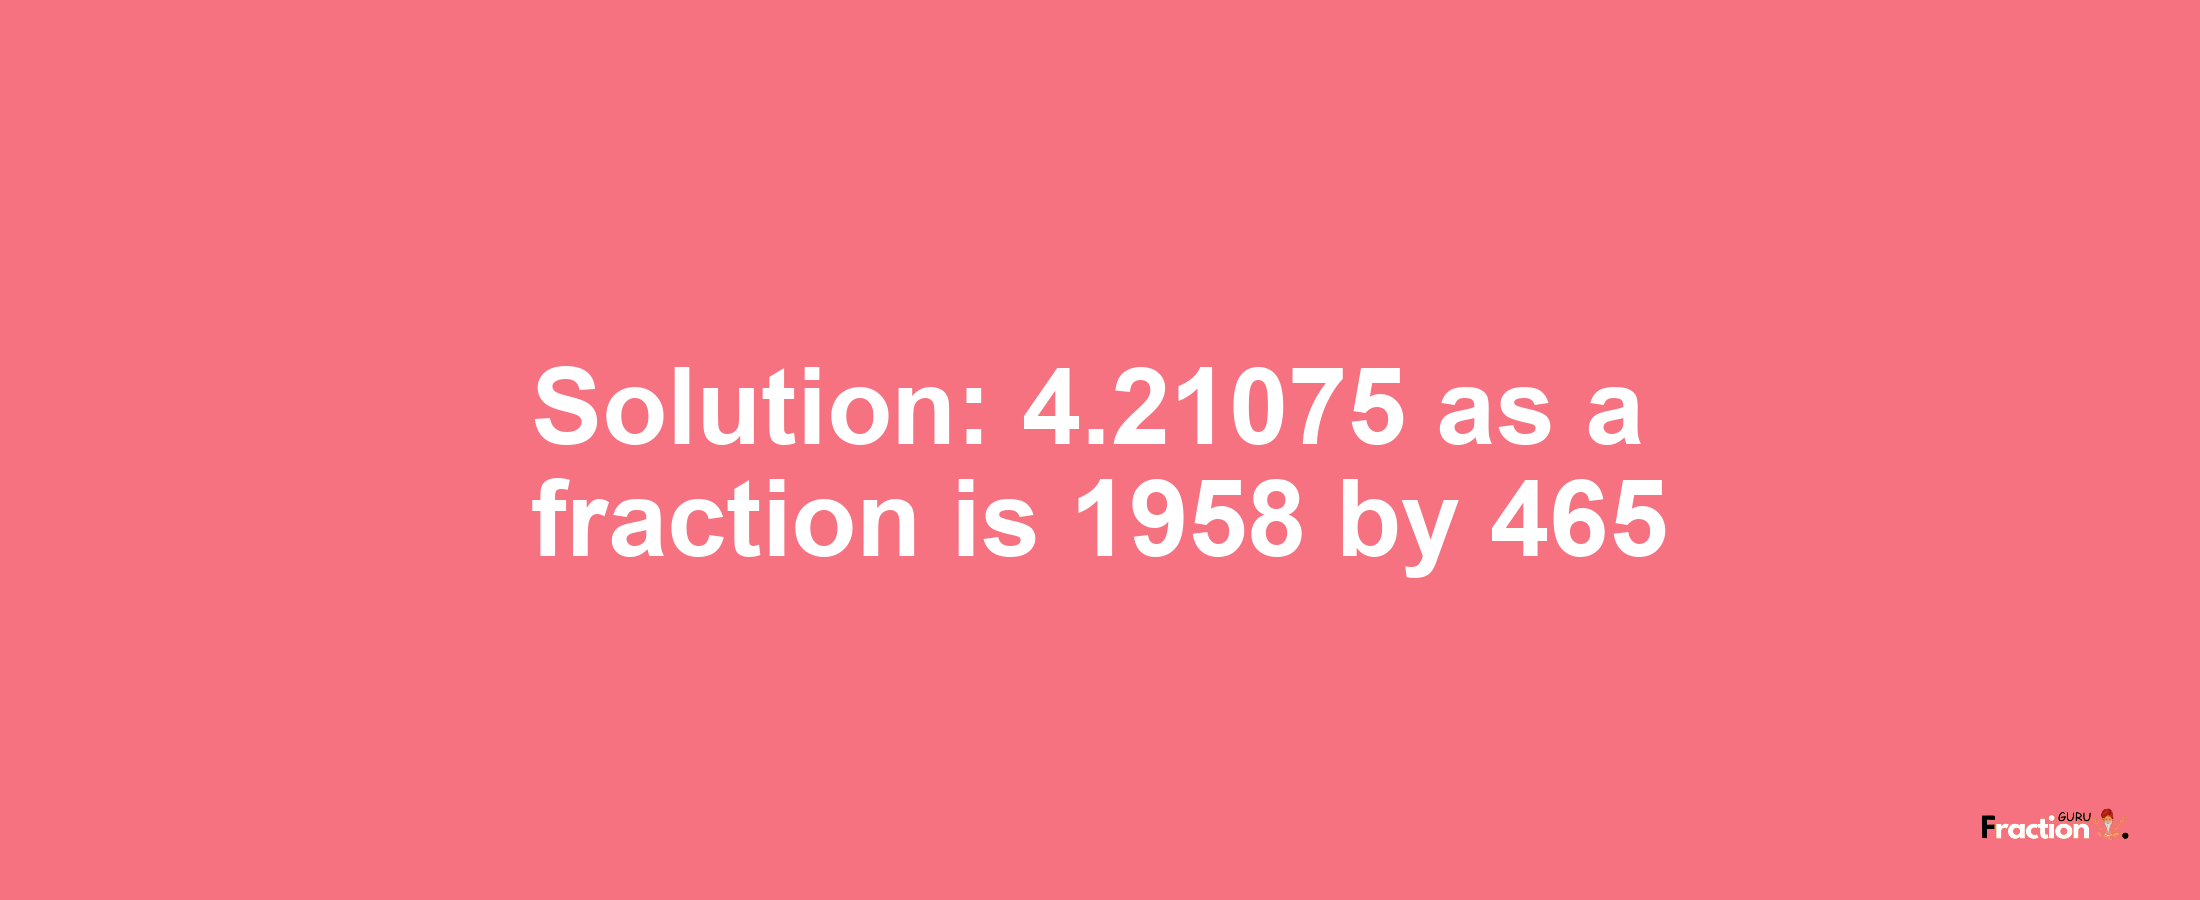 Solution:4.21075 as a fraction is 1958/465